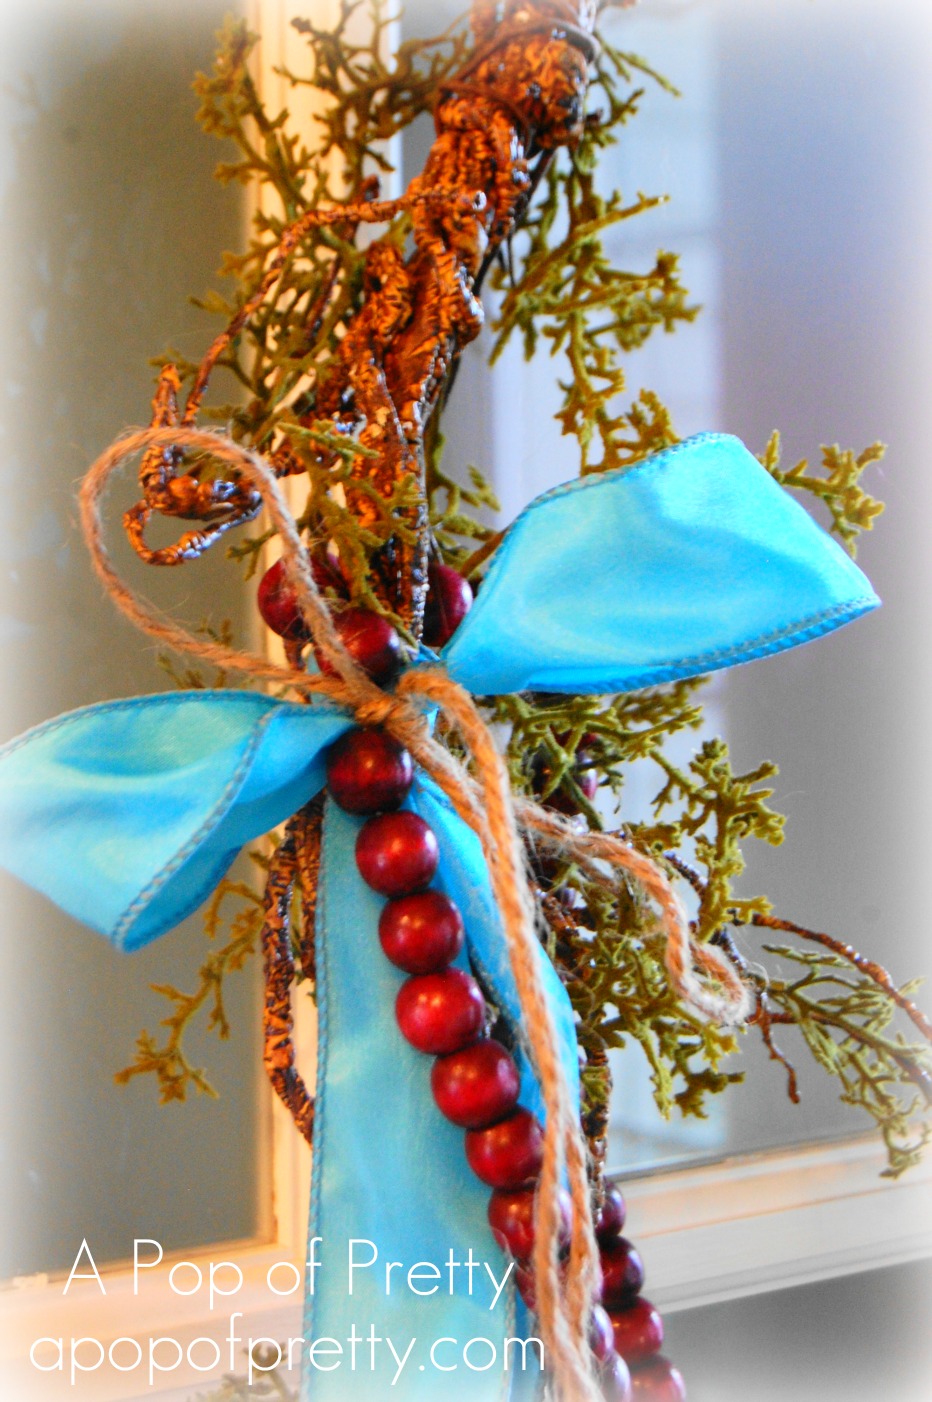 Simple rustic Christmas wreath (in turquoise and red)